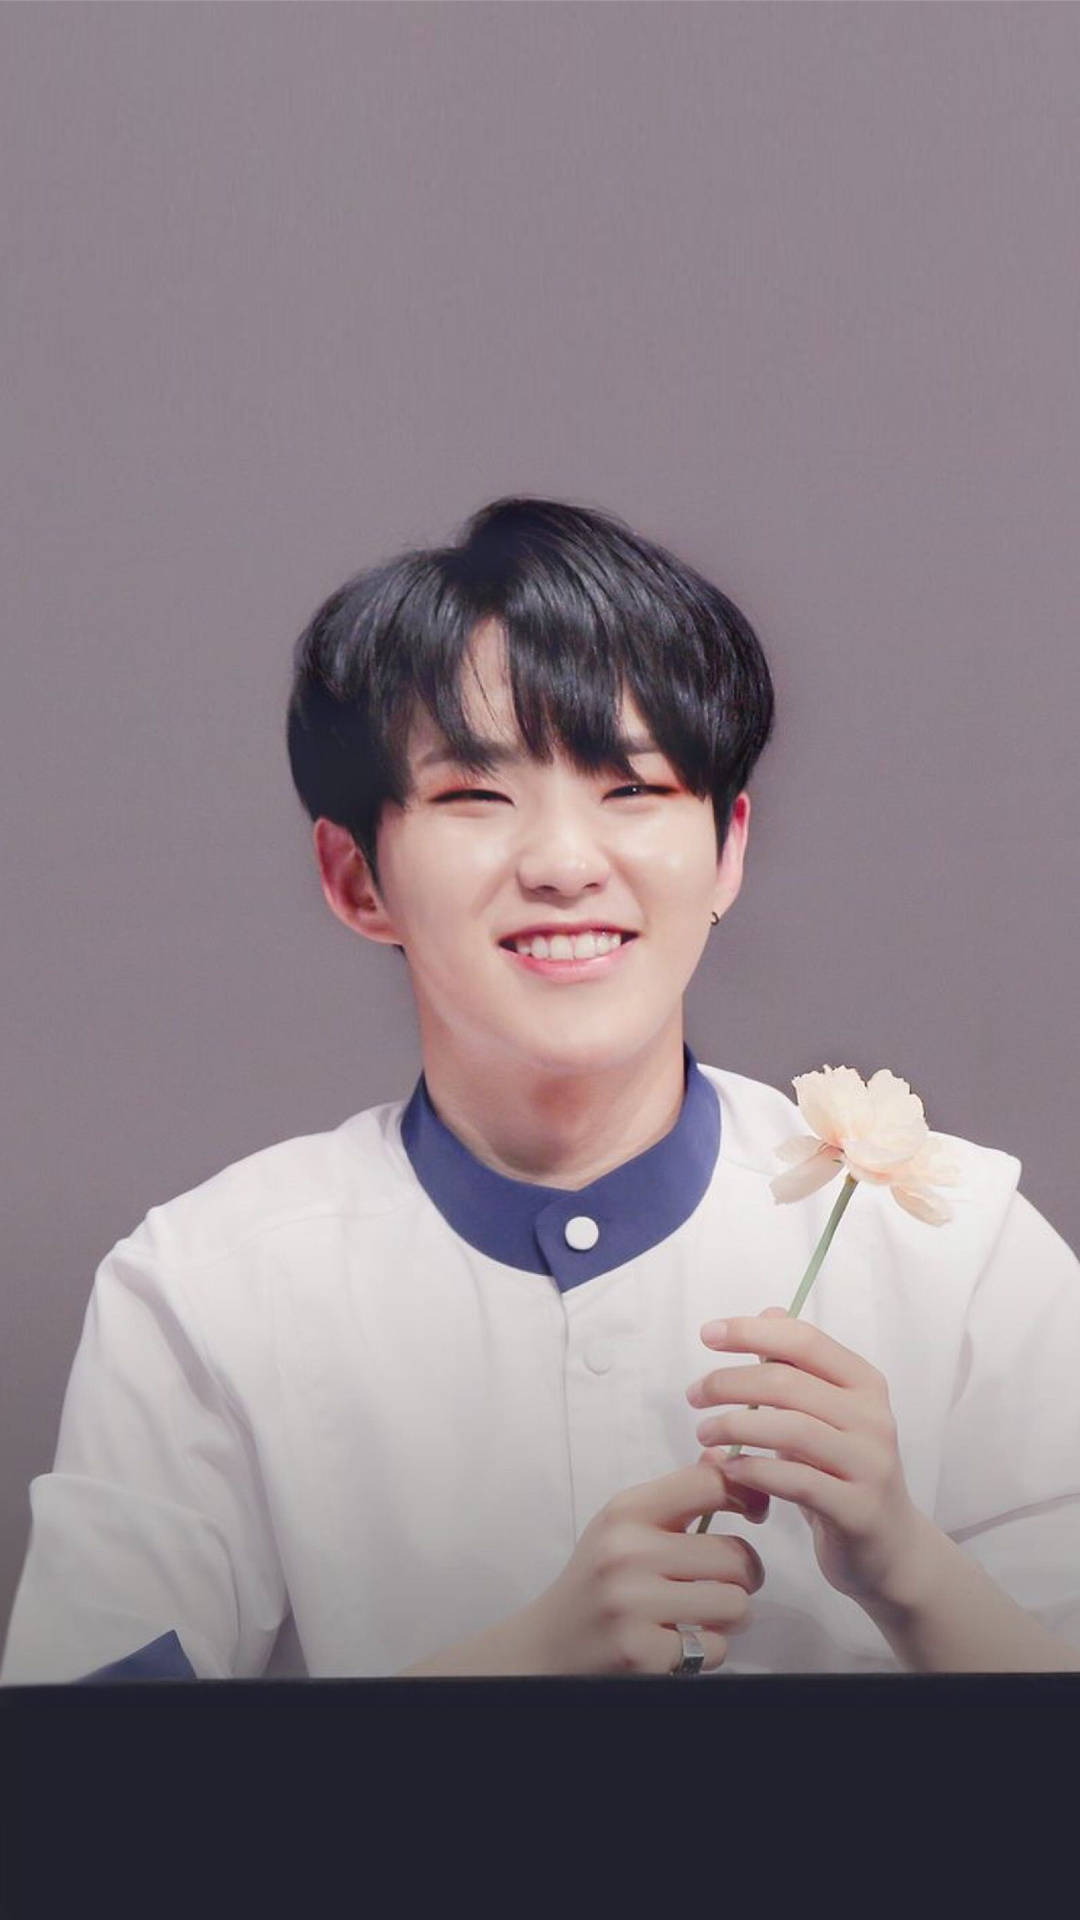 Hoshi at a Fan Signing Event Wallpaper